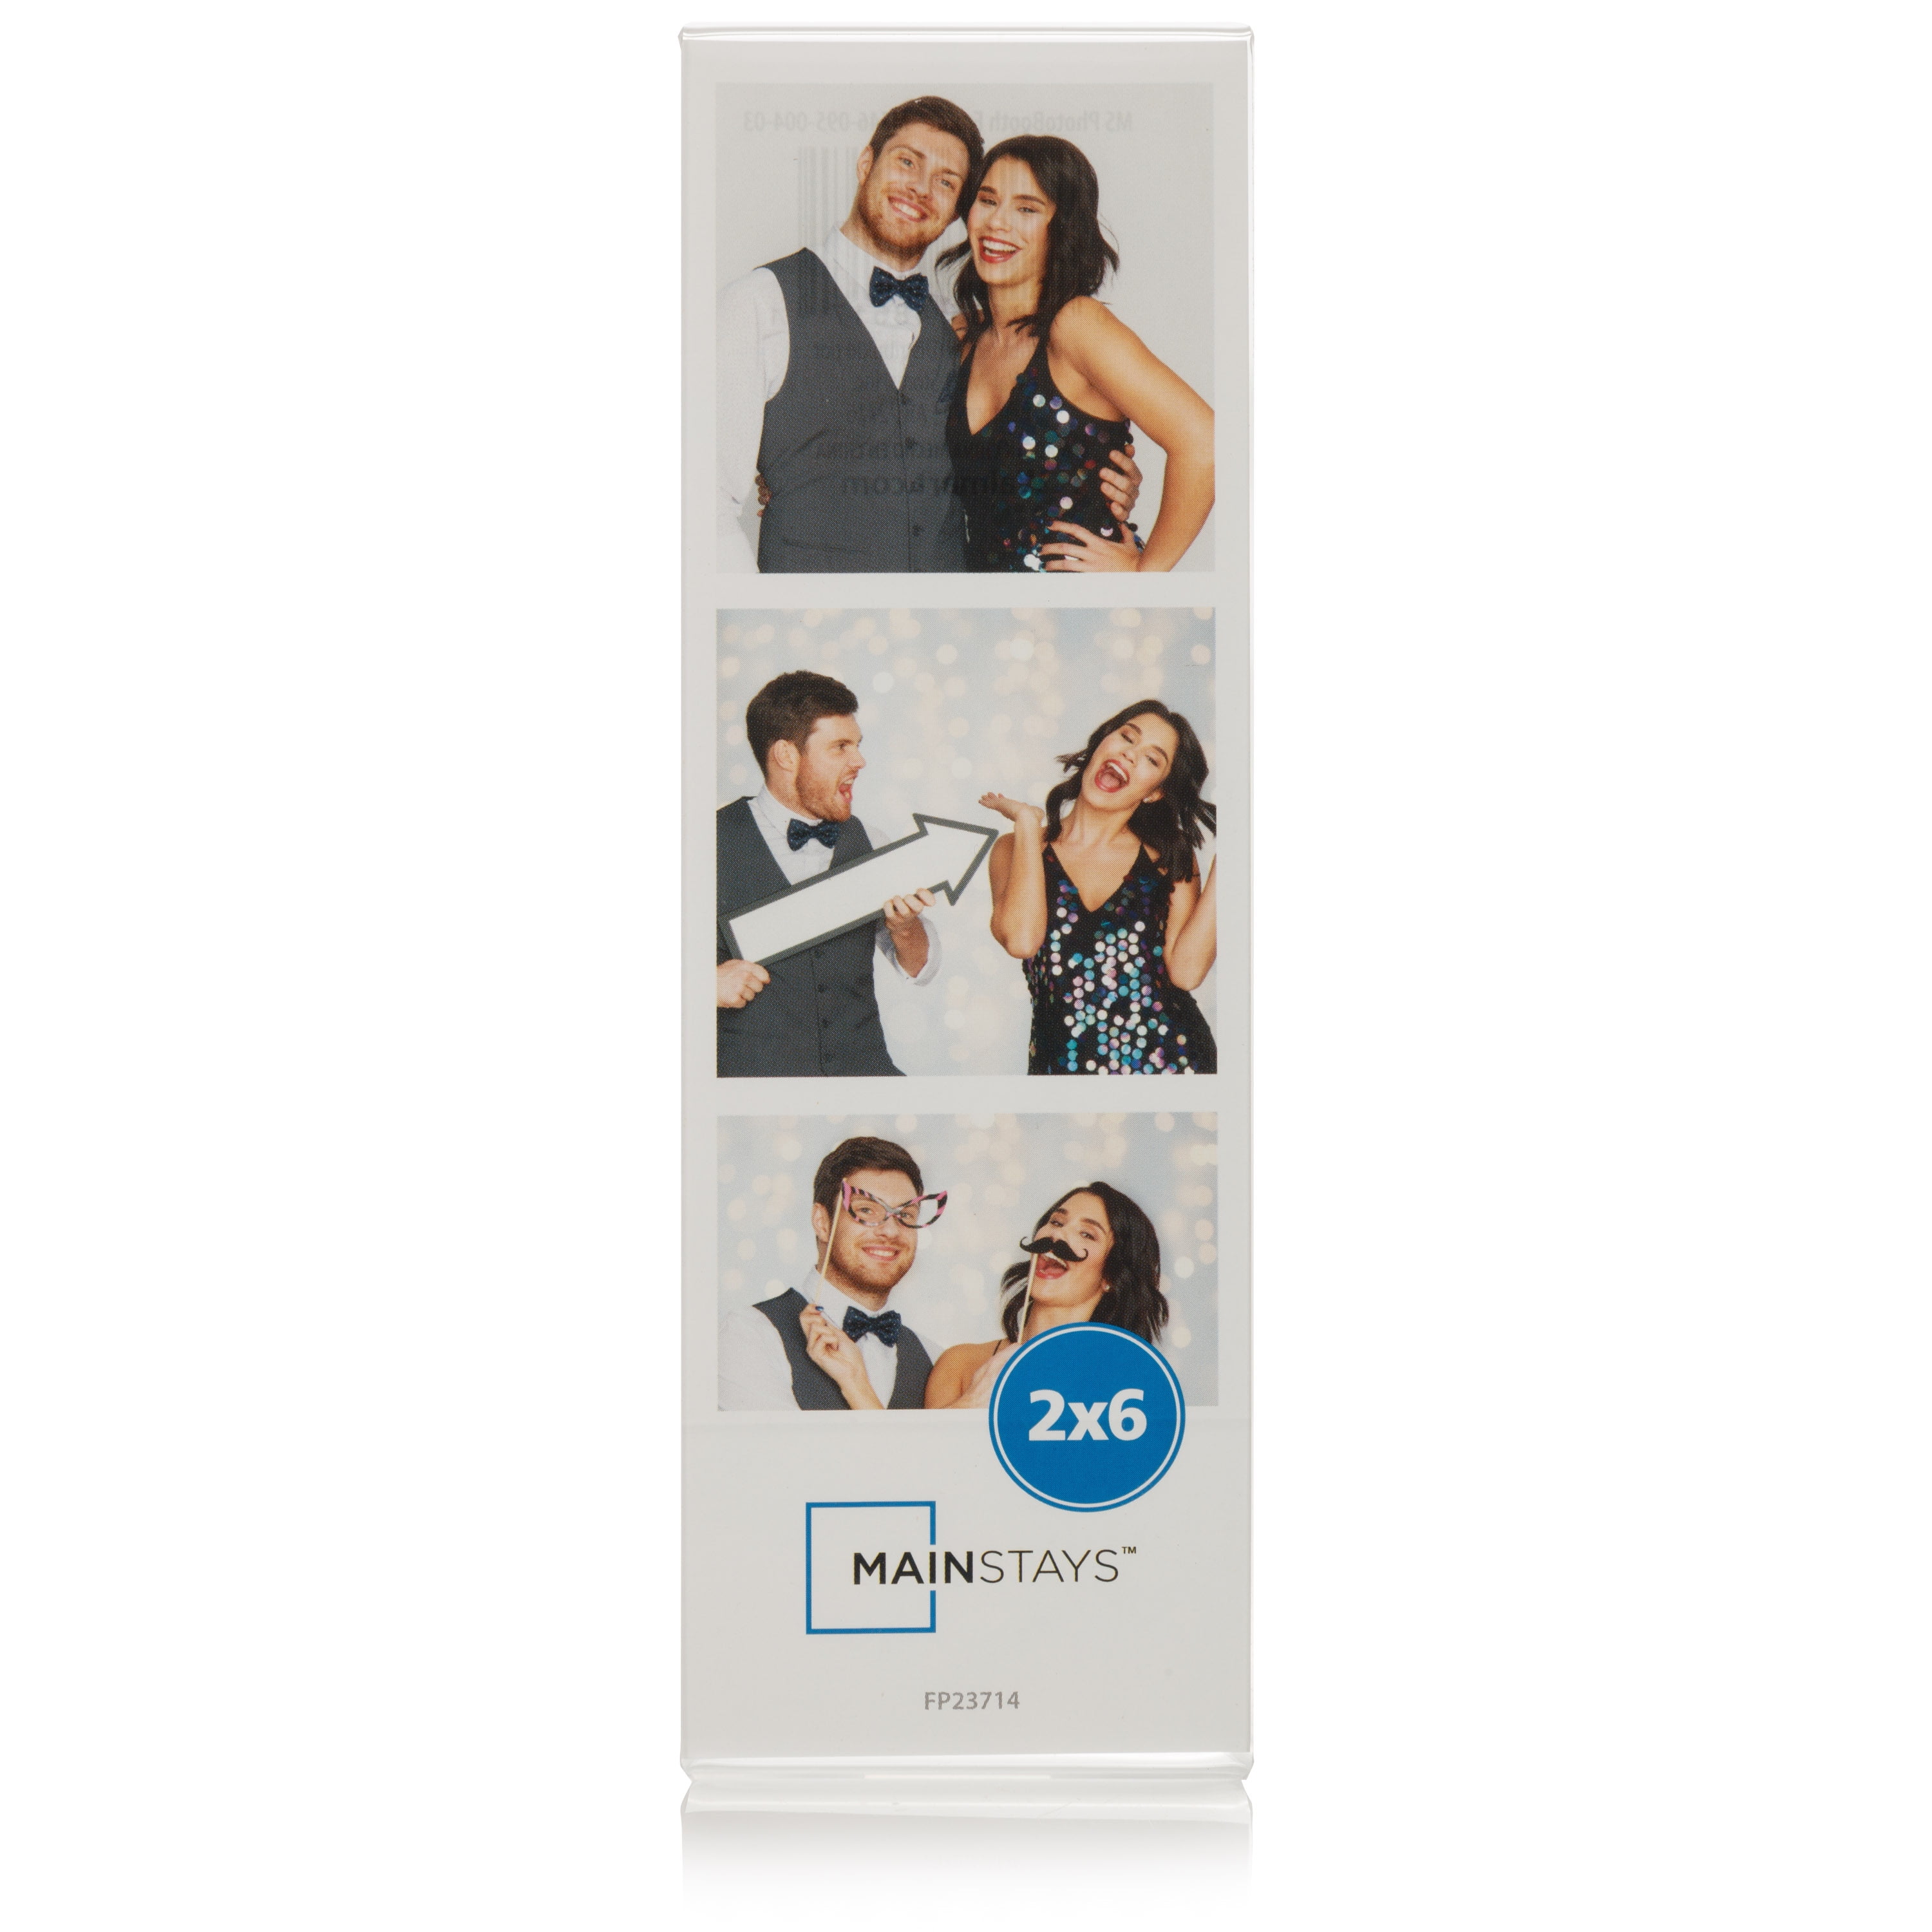 Mainstays 2 x 6 Photo Booth Size Wall Picture Frame, White